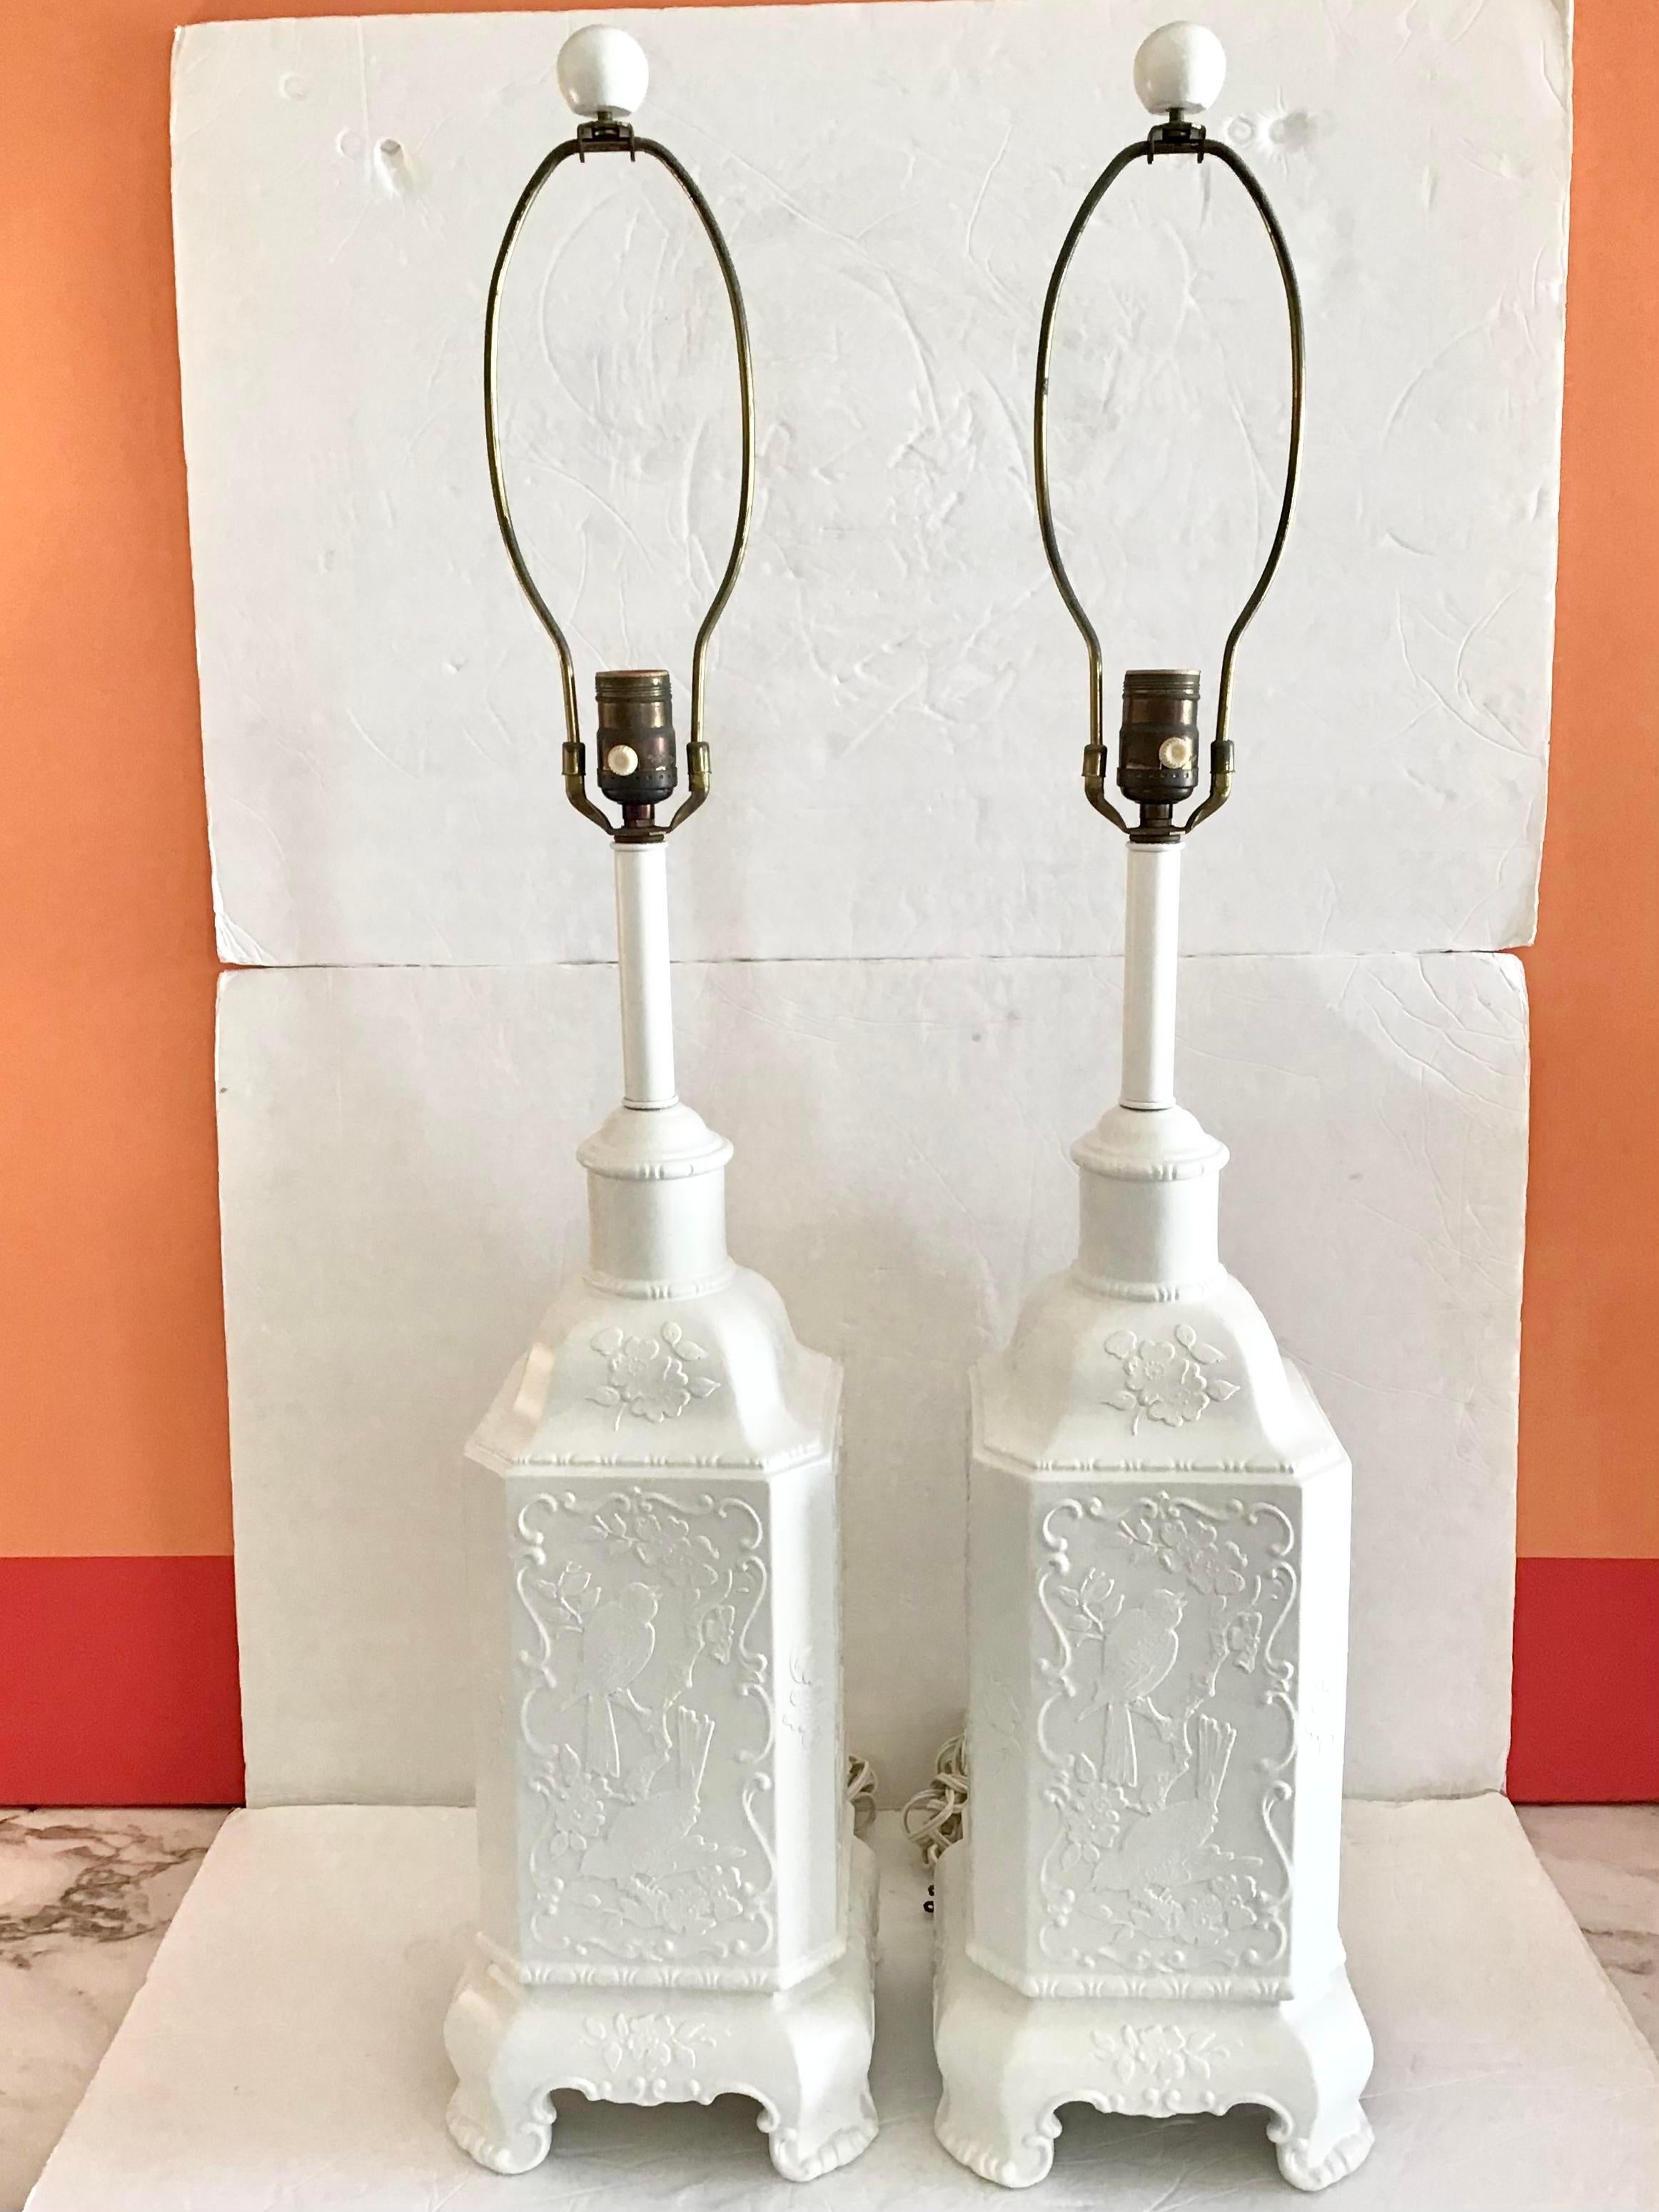 Fabulous pair of freshly lacquered in white rectangular Asian chinoiserie ceramic table lamps. Nice flora and fauna motifs on the sides. Add this pair to your boho chic inspired interiors. Does not include shades so add a pair of your choice.